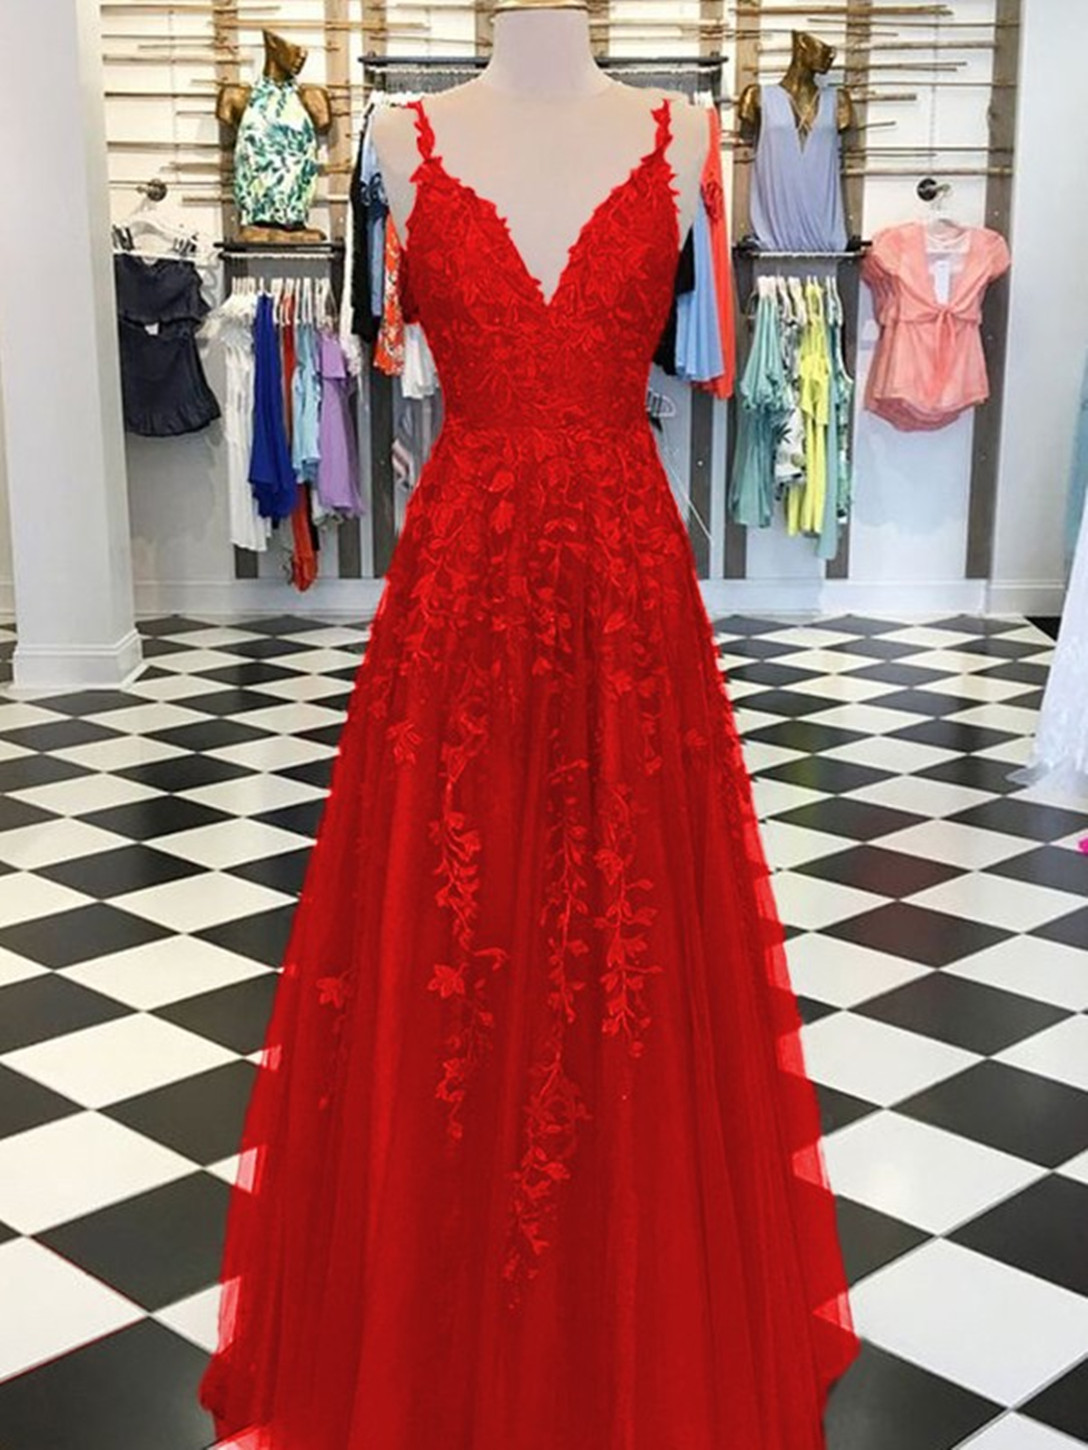 Women A-line/princess Lace Prom Dresses Long V-neck Appliques Evening Gowns Sleeveless Formal Party Dress Yp014